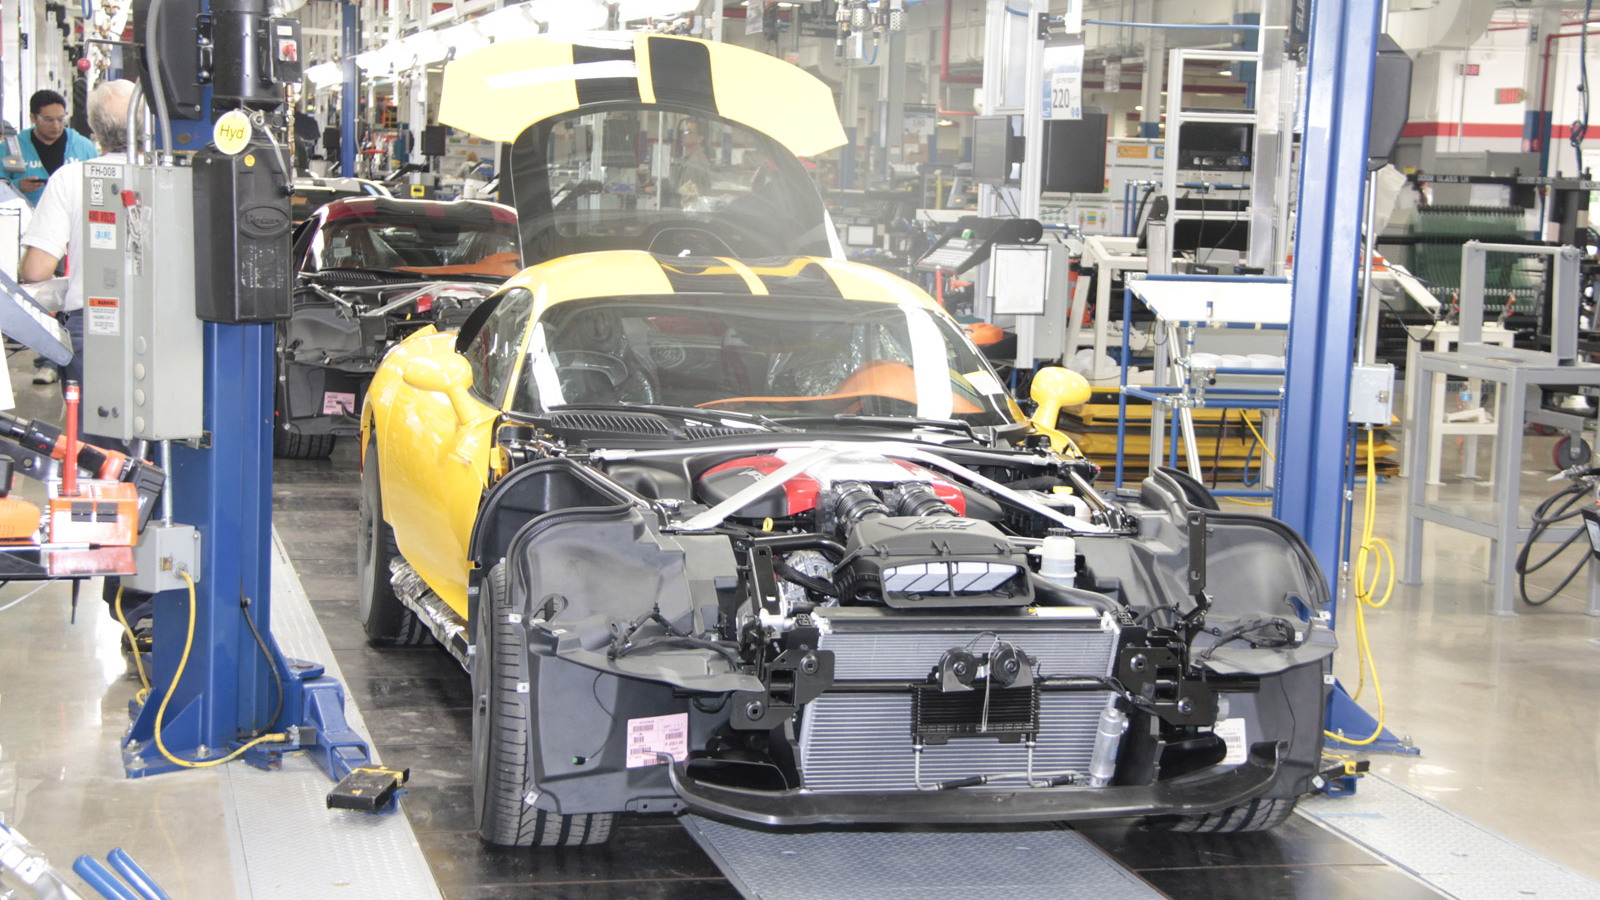 Price Cut Doubles Viper Sales, Production To Resume In November